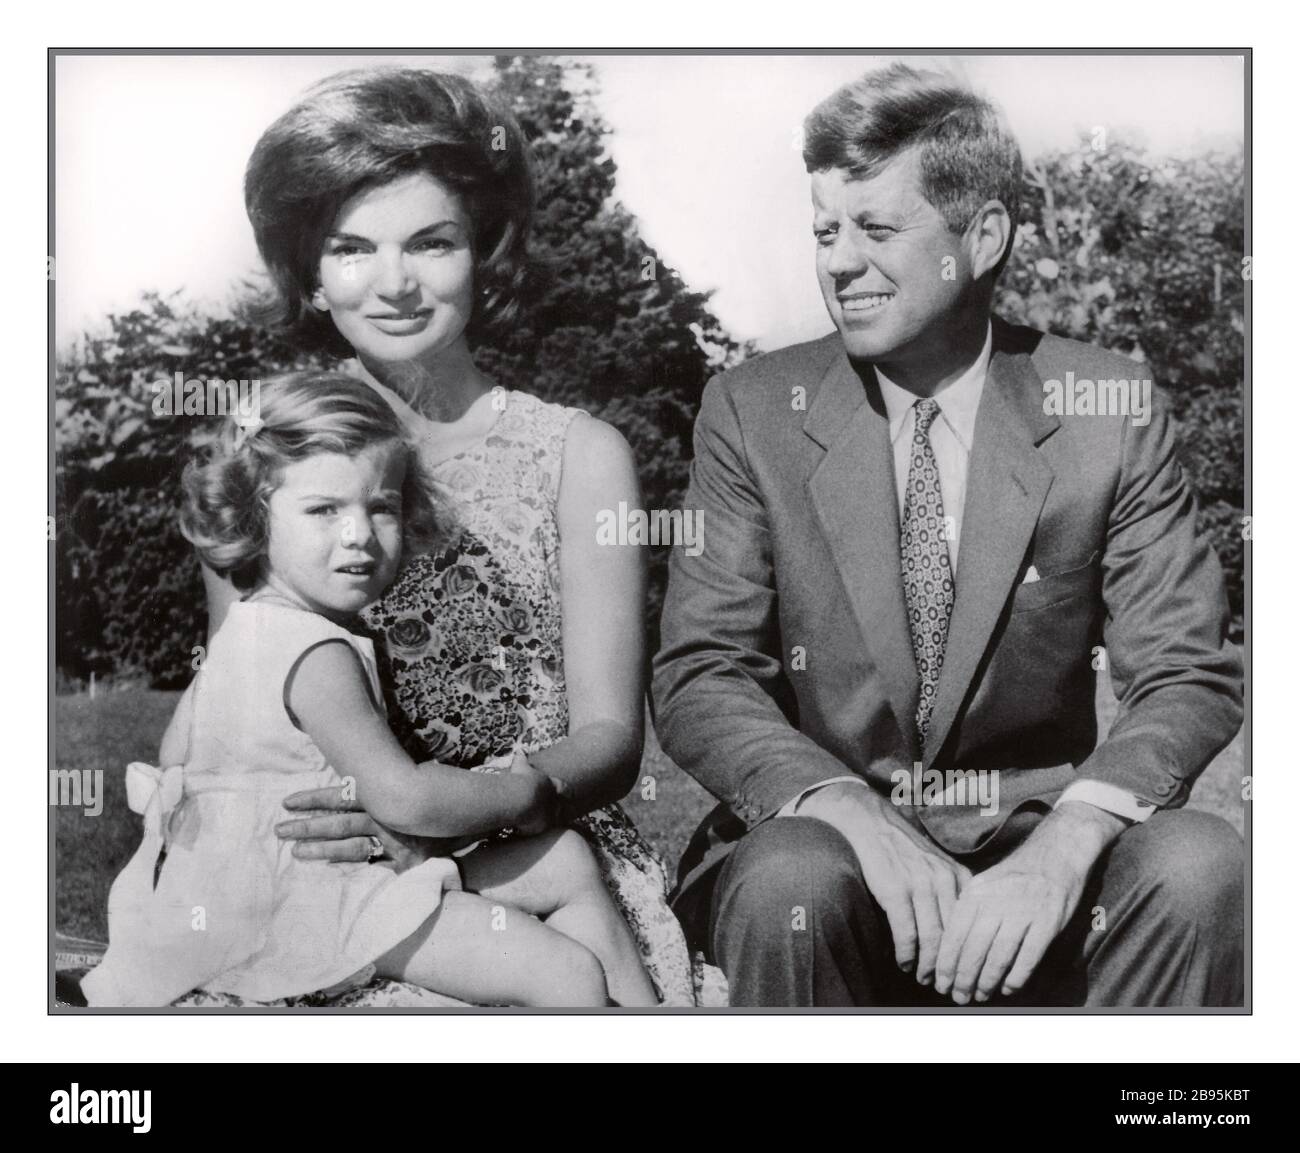 JFK Democratic Presidential nominee, Senator John F. Kennedy archive campaign photograph with his family in summer home garden July 21st. 1960 with his wife, Jacqueline Kennedy holding Caroline Kennedy Hyannis Port USA Stock Photo